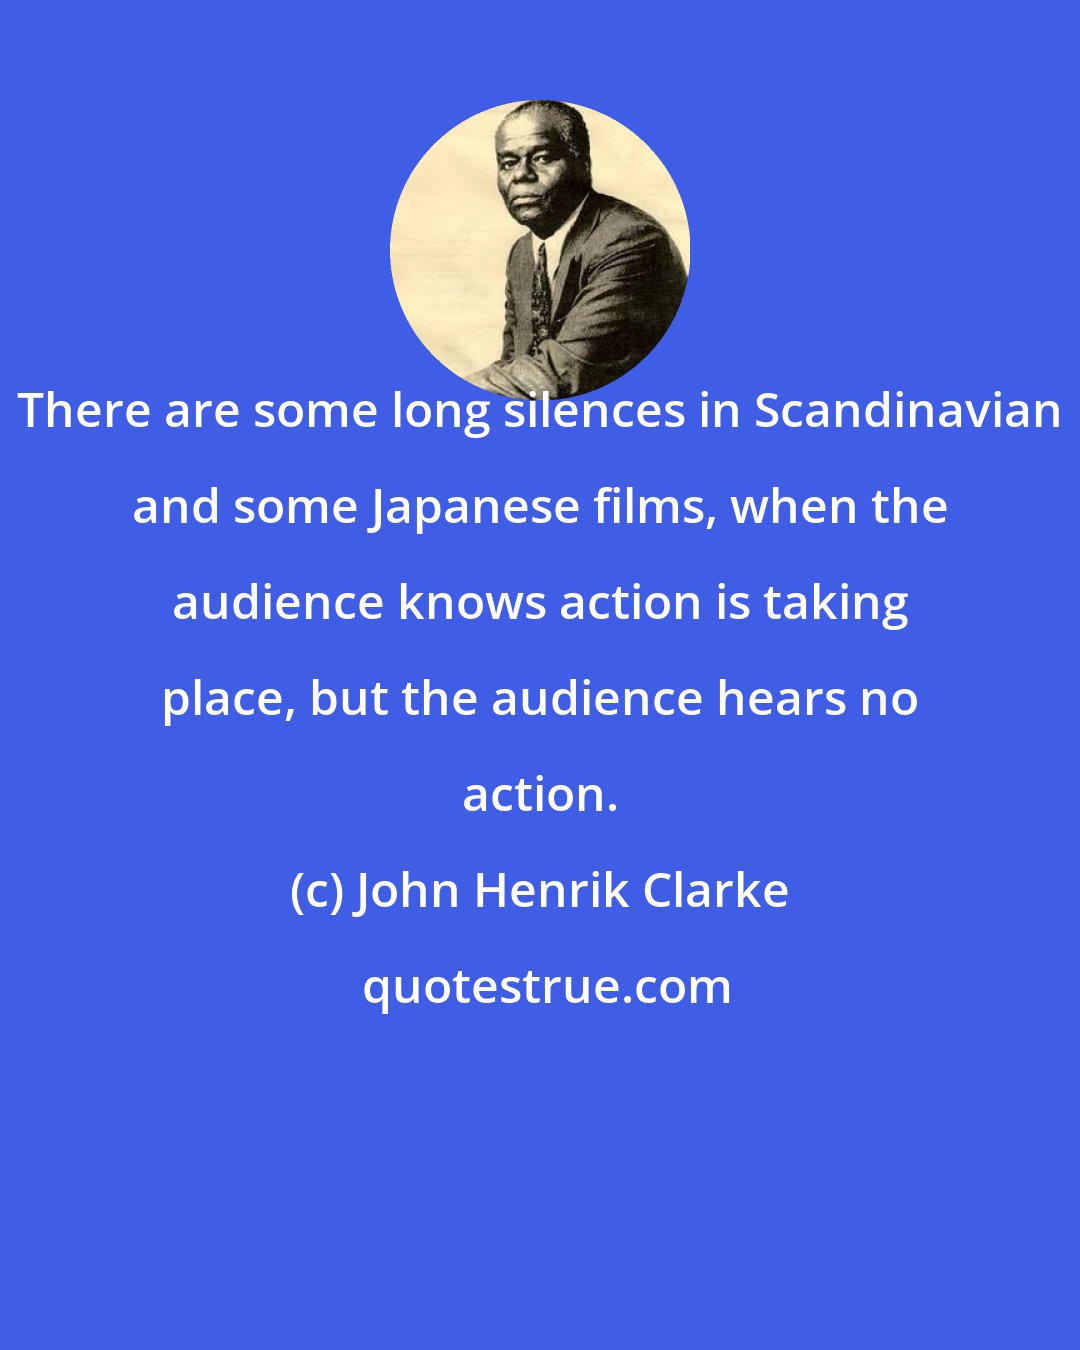 John Henrik Clarke: There are some long silences in Scandinavian and some Japanese films, when the audience knows action is taking place, but the audience hears no action.